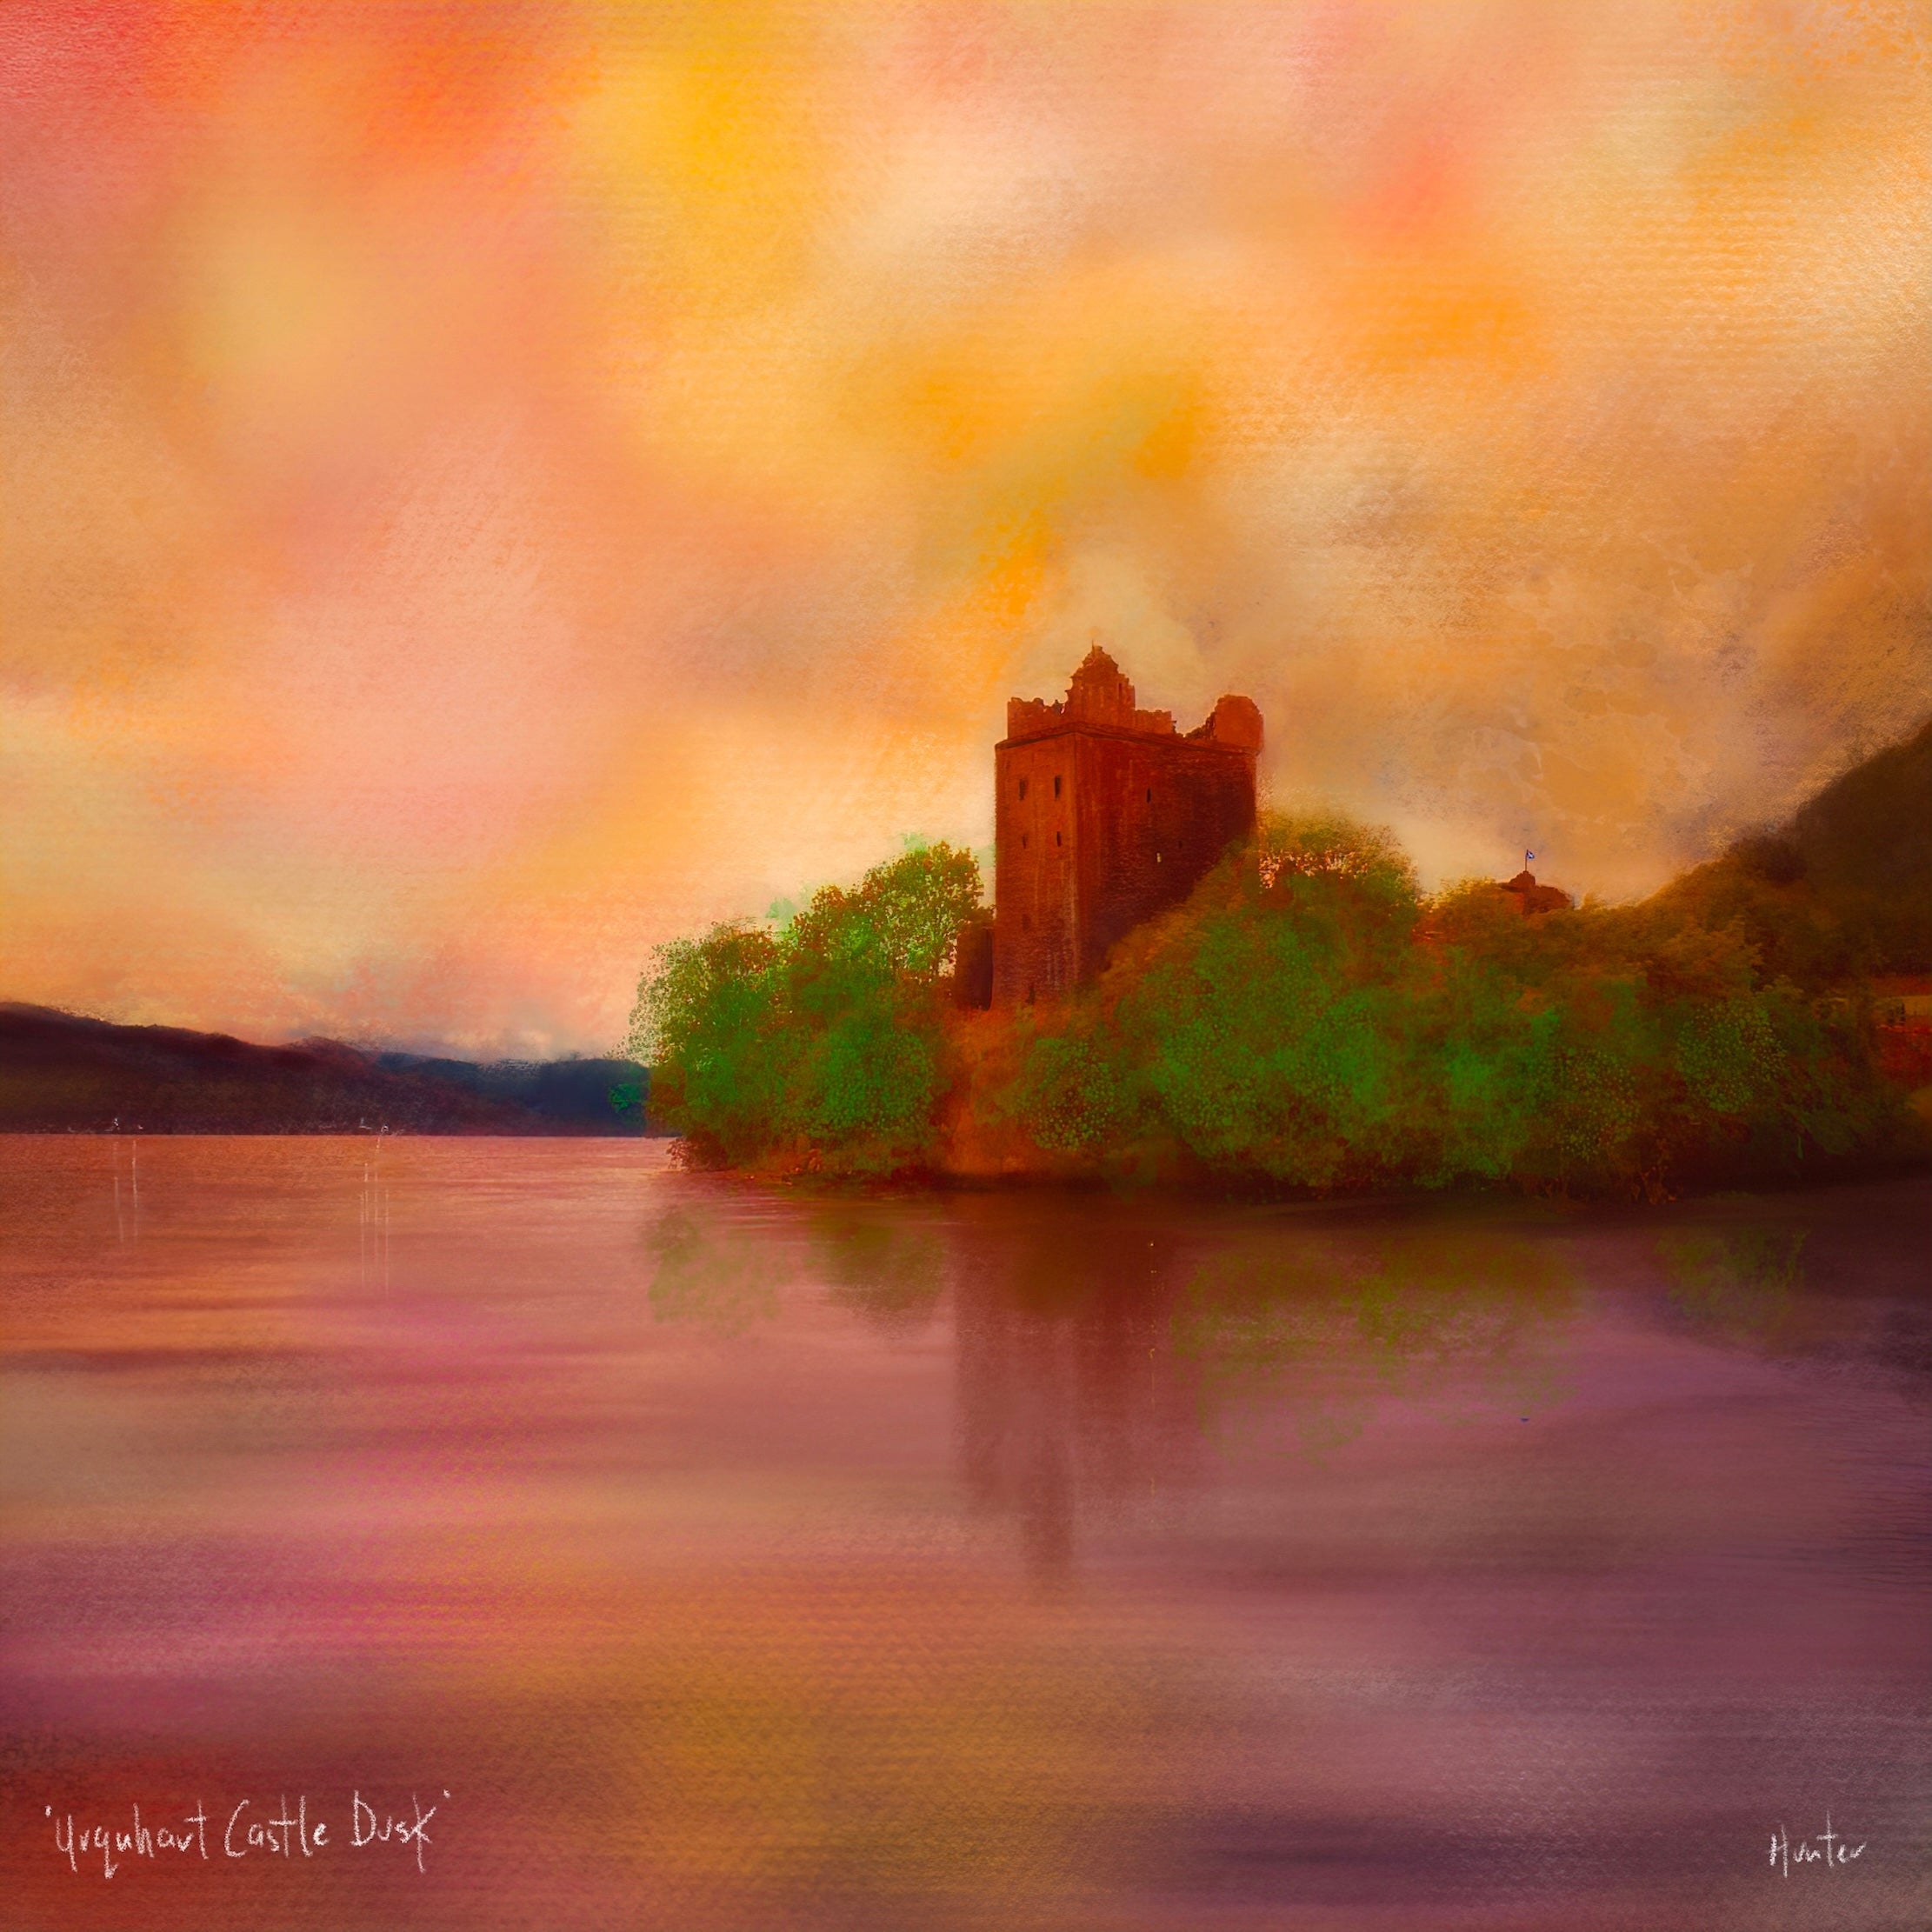 Urquhart Castle Dusk | Scotland In Your Pocket Art Print-Scotland In Your Pocket Framed Prints-Historic & Iconic Scotland Art Gallery-Mounted & Cello Bag: 12.5x12.5 cm-Black Frame-Paintings, Prints, Homeware, Art Gifts From Scotland By Scottish Artist Kevin Hunter